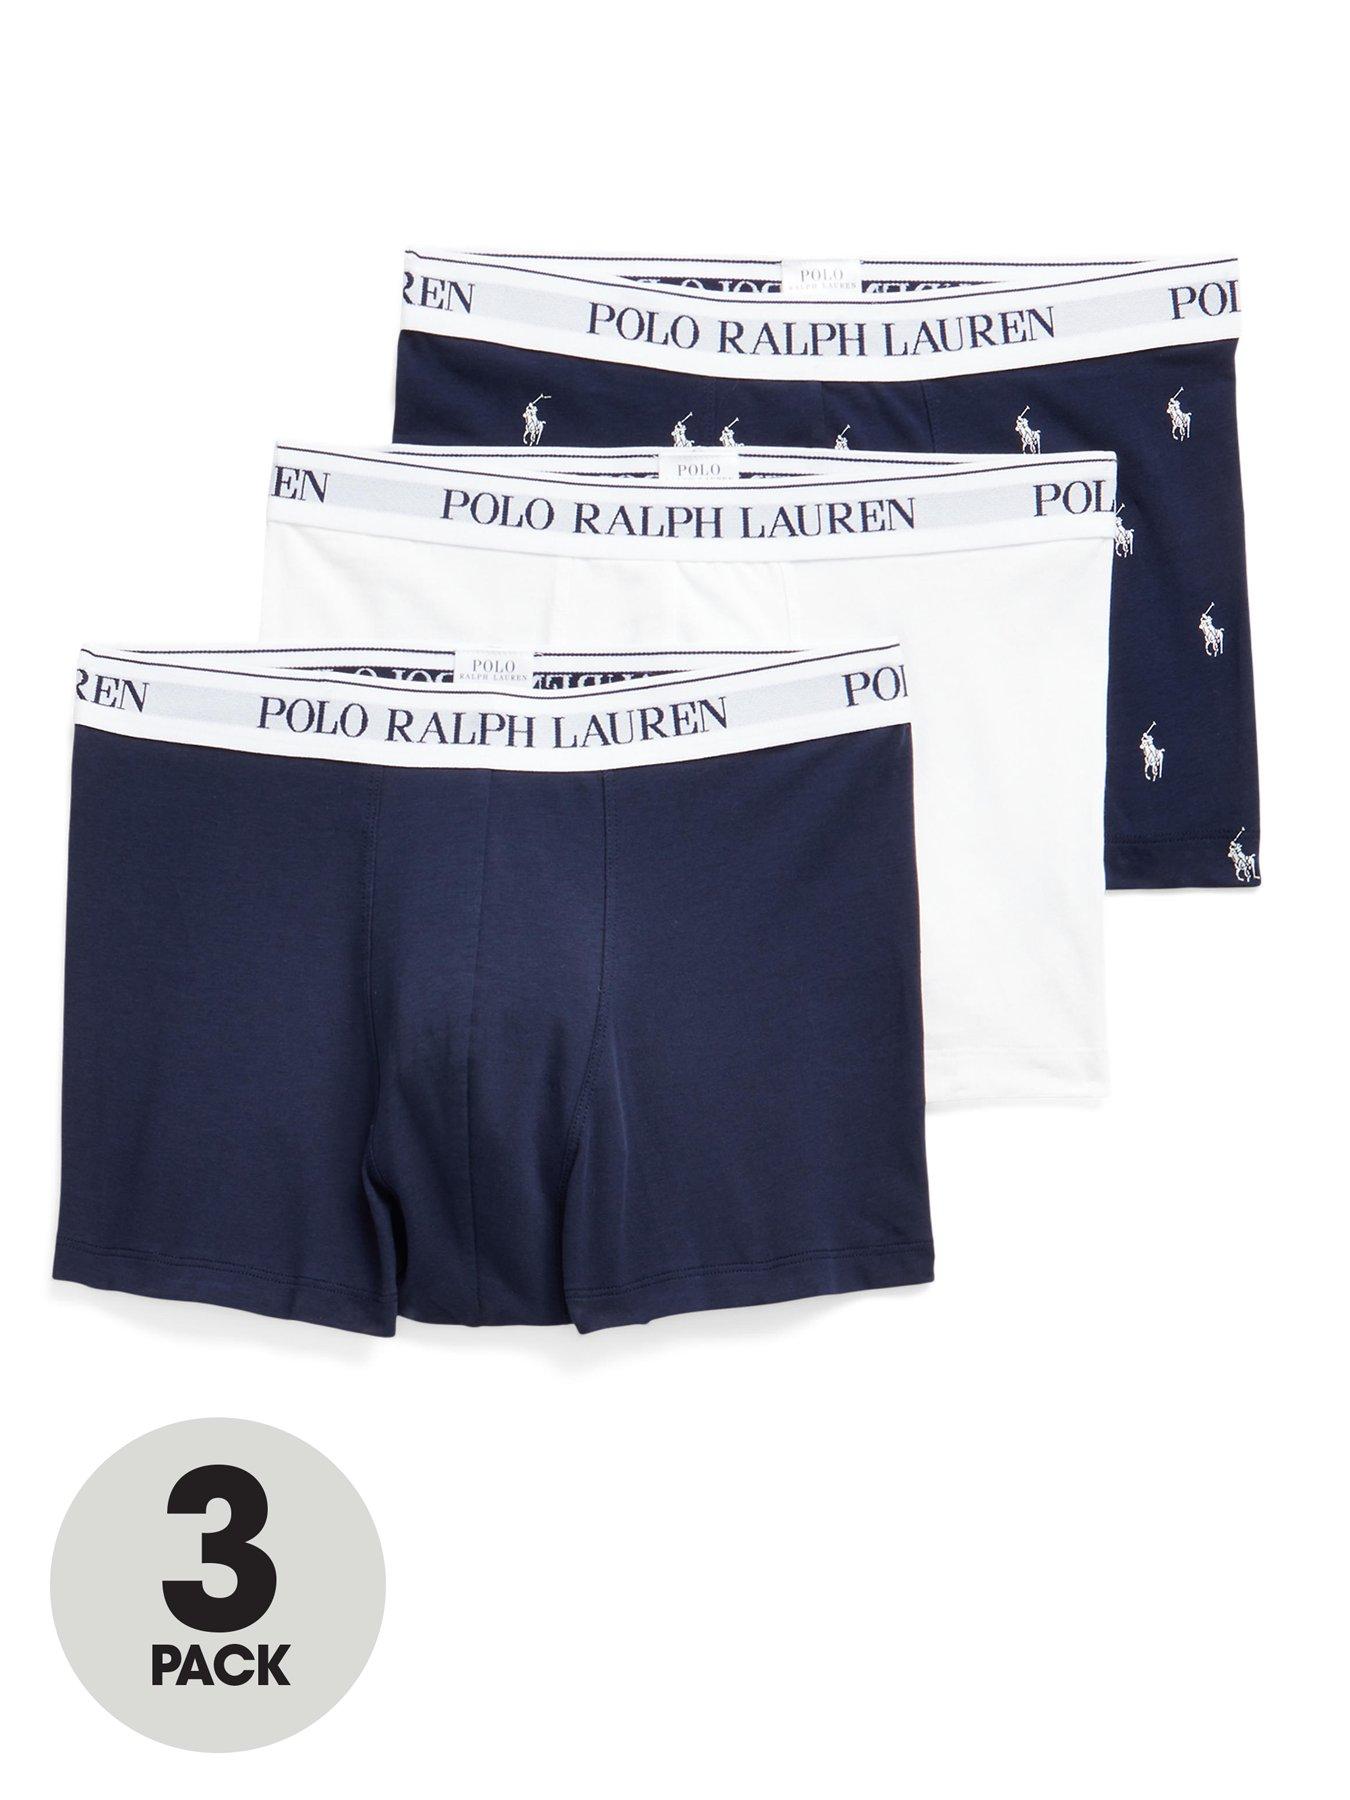 Polo Ralph Lauren 3 pack briefs in navy/burgundy/green with contrasting  logo waistband